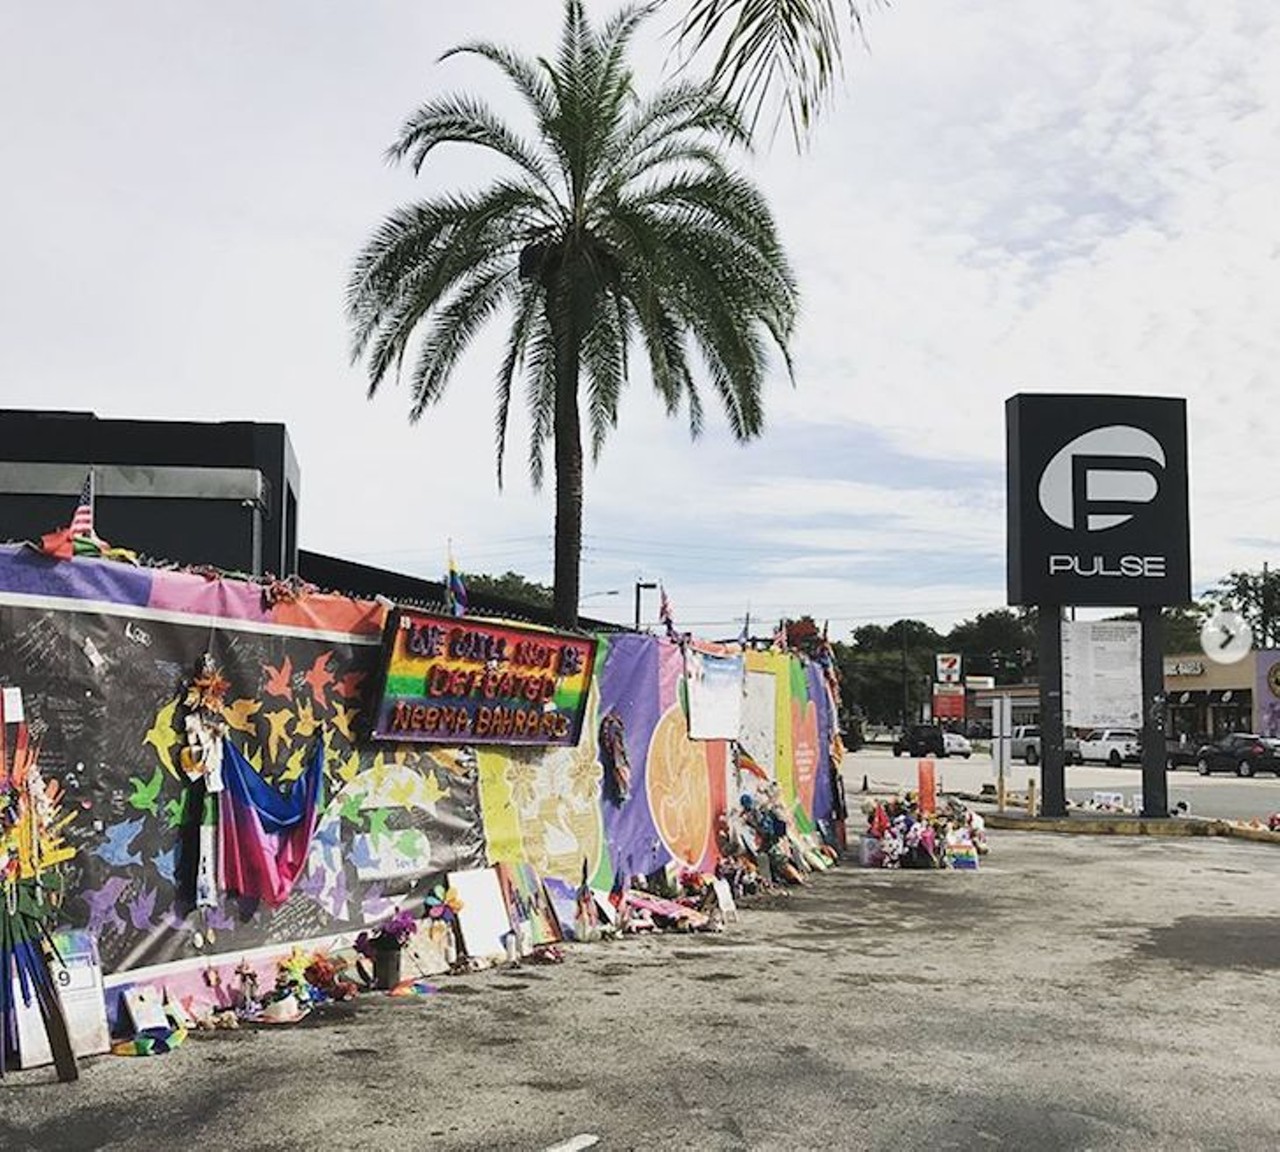 What to do
Pulse
1912 S. Orange Ave.
Pay your respects at this artful, ever-changing memorial to the 49 victims who died on June 12. While you're here, visit the LOVE hands mural dedicated to Pulse by Baltimore artist Michael Owen across the street at the Einstein Bros. Bagels.
pulseorlandoclub.com
What to do
Super Target
120 W. Grant St., 407-608-1580
If you're a Target freak (and you know who you are), this Target in the SoDo shopping plaza is heaven. It's open until 11 p.m., has a huge parking garage and the biggest selection of Target merchandise of any other Target in Orlando. There's also a pretty cool graffiti wall around the back of the shopping plaza that you might want to check out.
www.target.com
What to do
Foreign Accents
2301 S. Orange Ave., 407-648-2464
Handmade and imported (much from Mexico and Central America) wooden furniture, as well as home accents in ceramics, glass and wrought iron.
foreignaccents.com
Pictured: Pulse via brittanyg112/Instagram